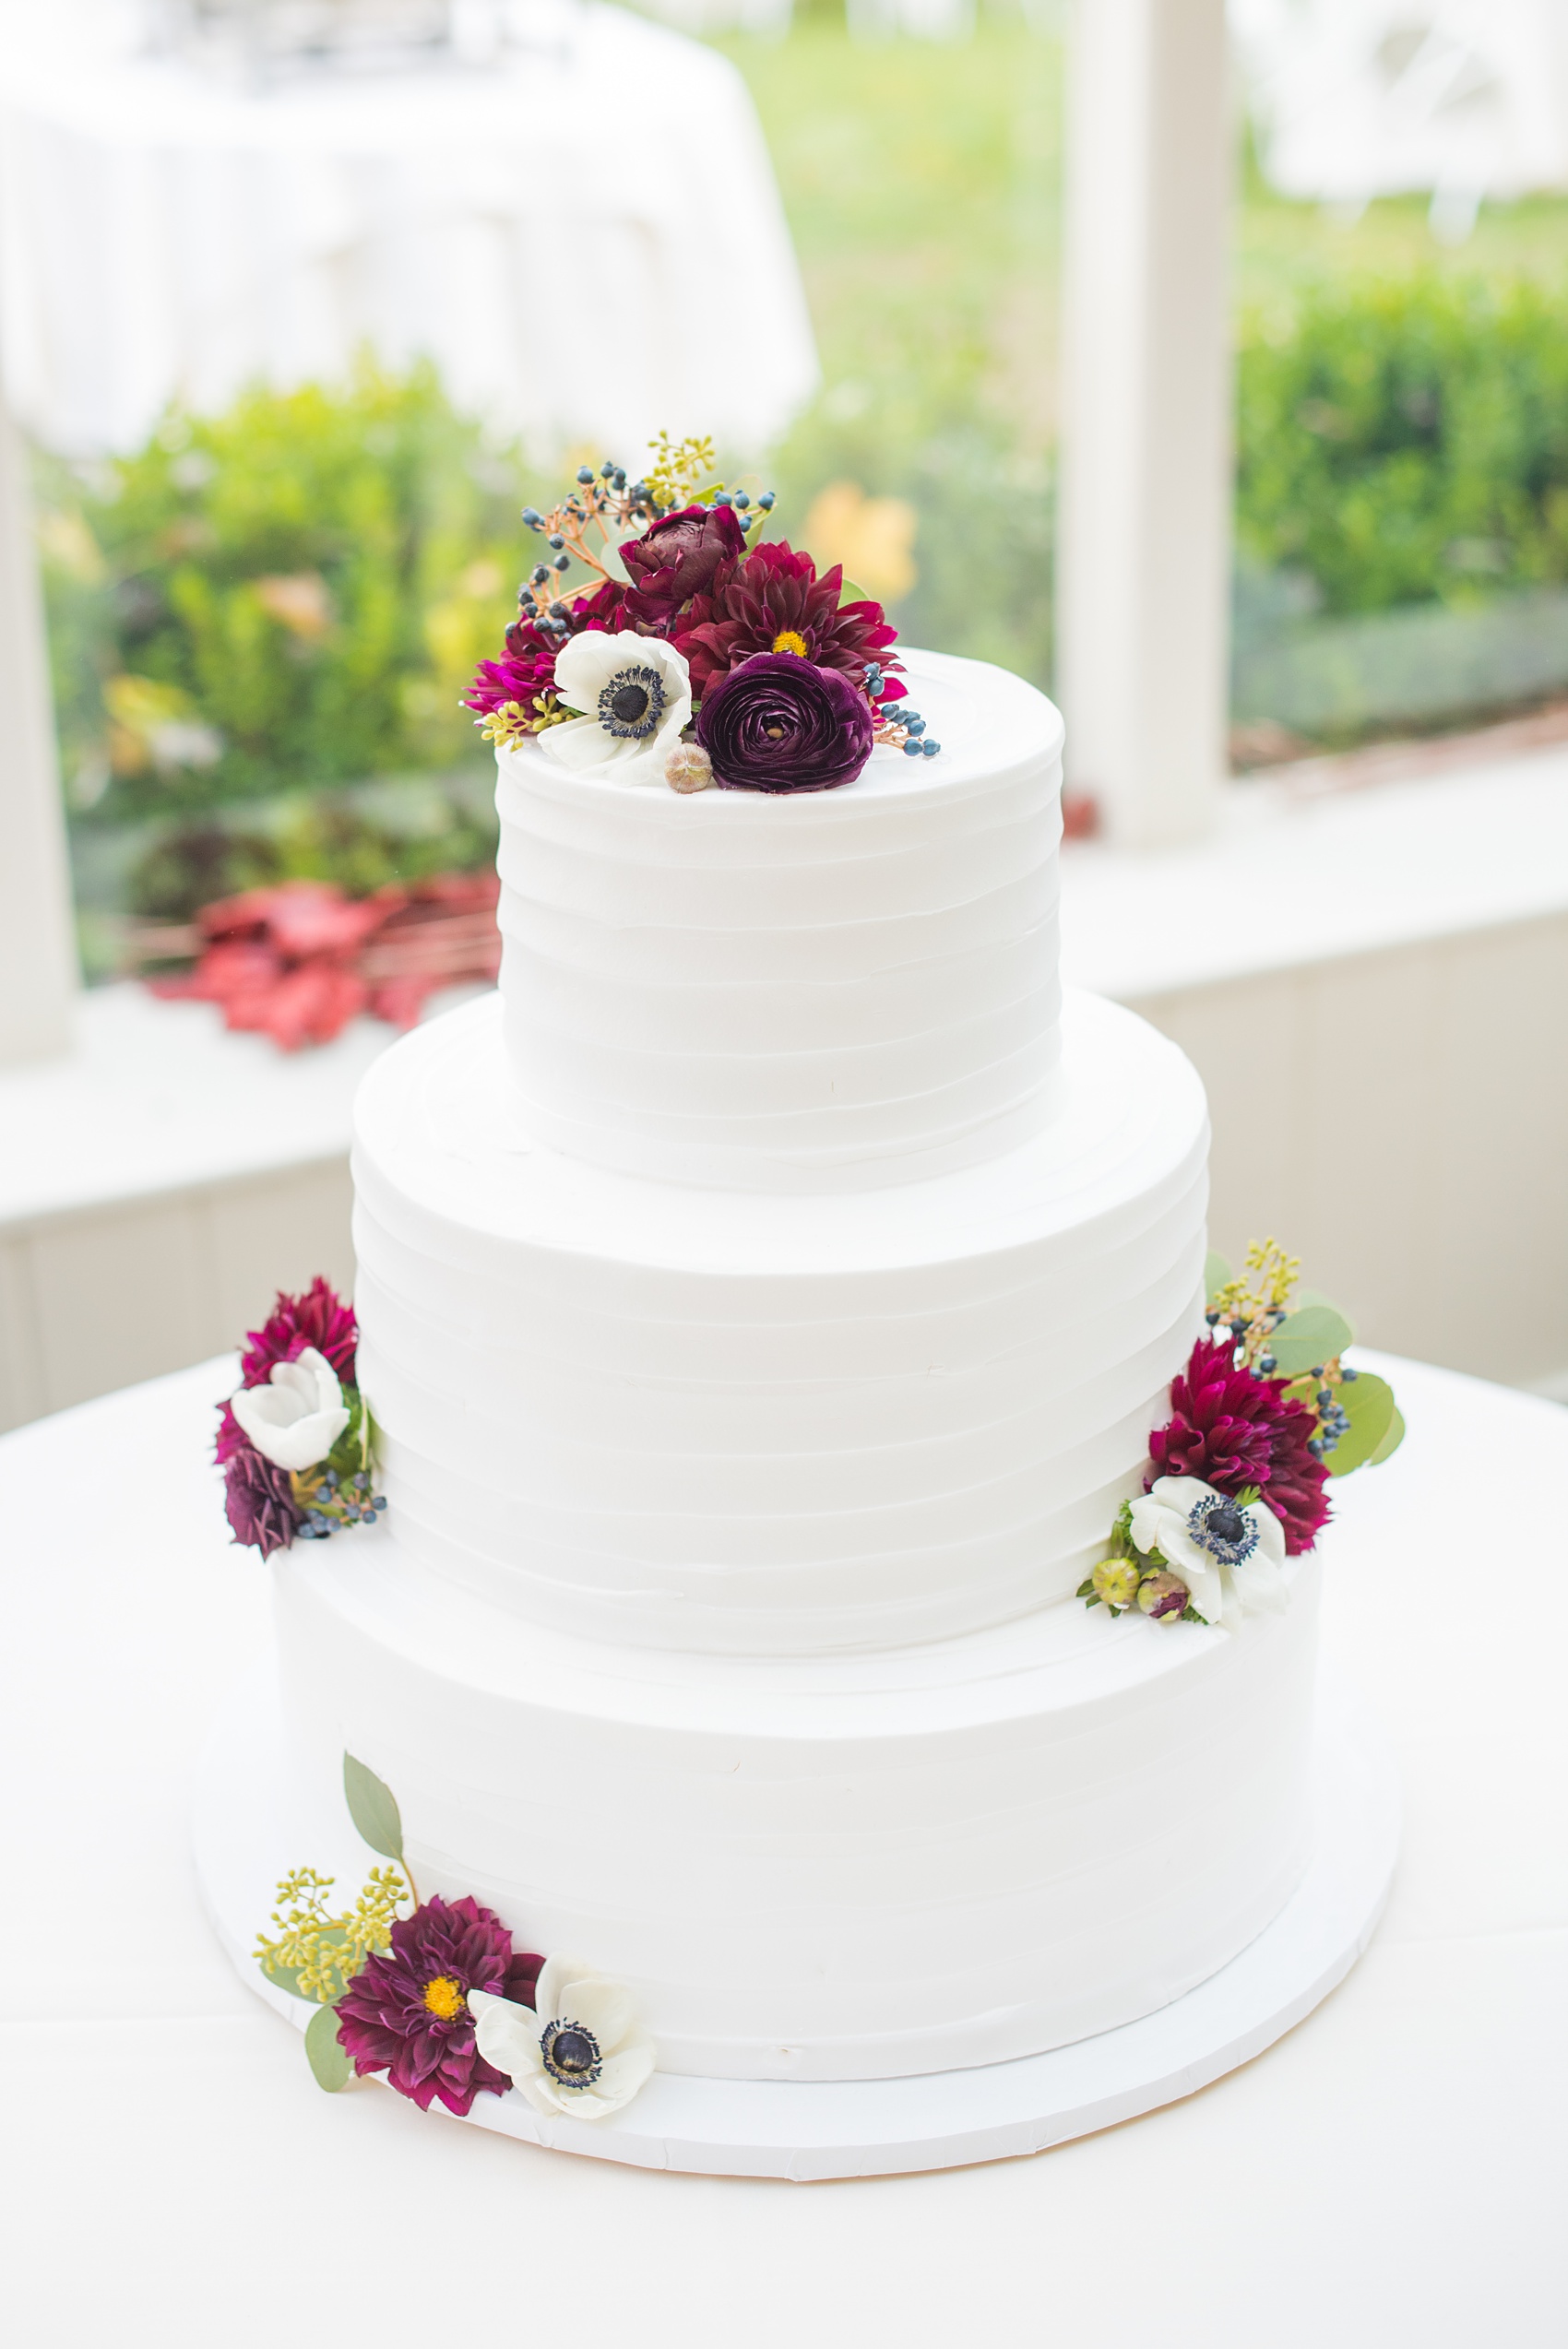 Mikkel Paige Photography photos of a wedding at Crabtree's Kittle House in Chappaqua, New York. Picture of the white buttercream cake decorated with fresh fall flowers.